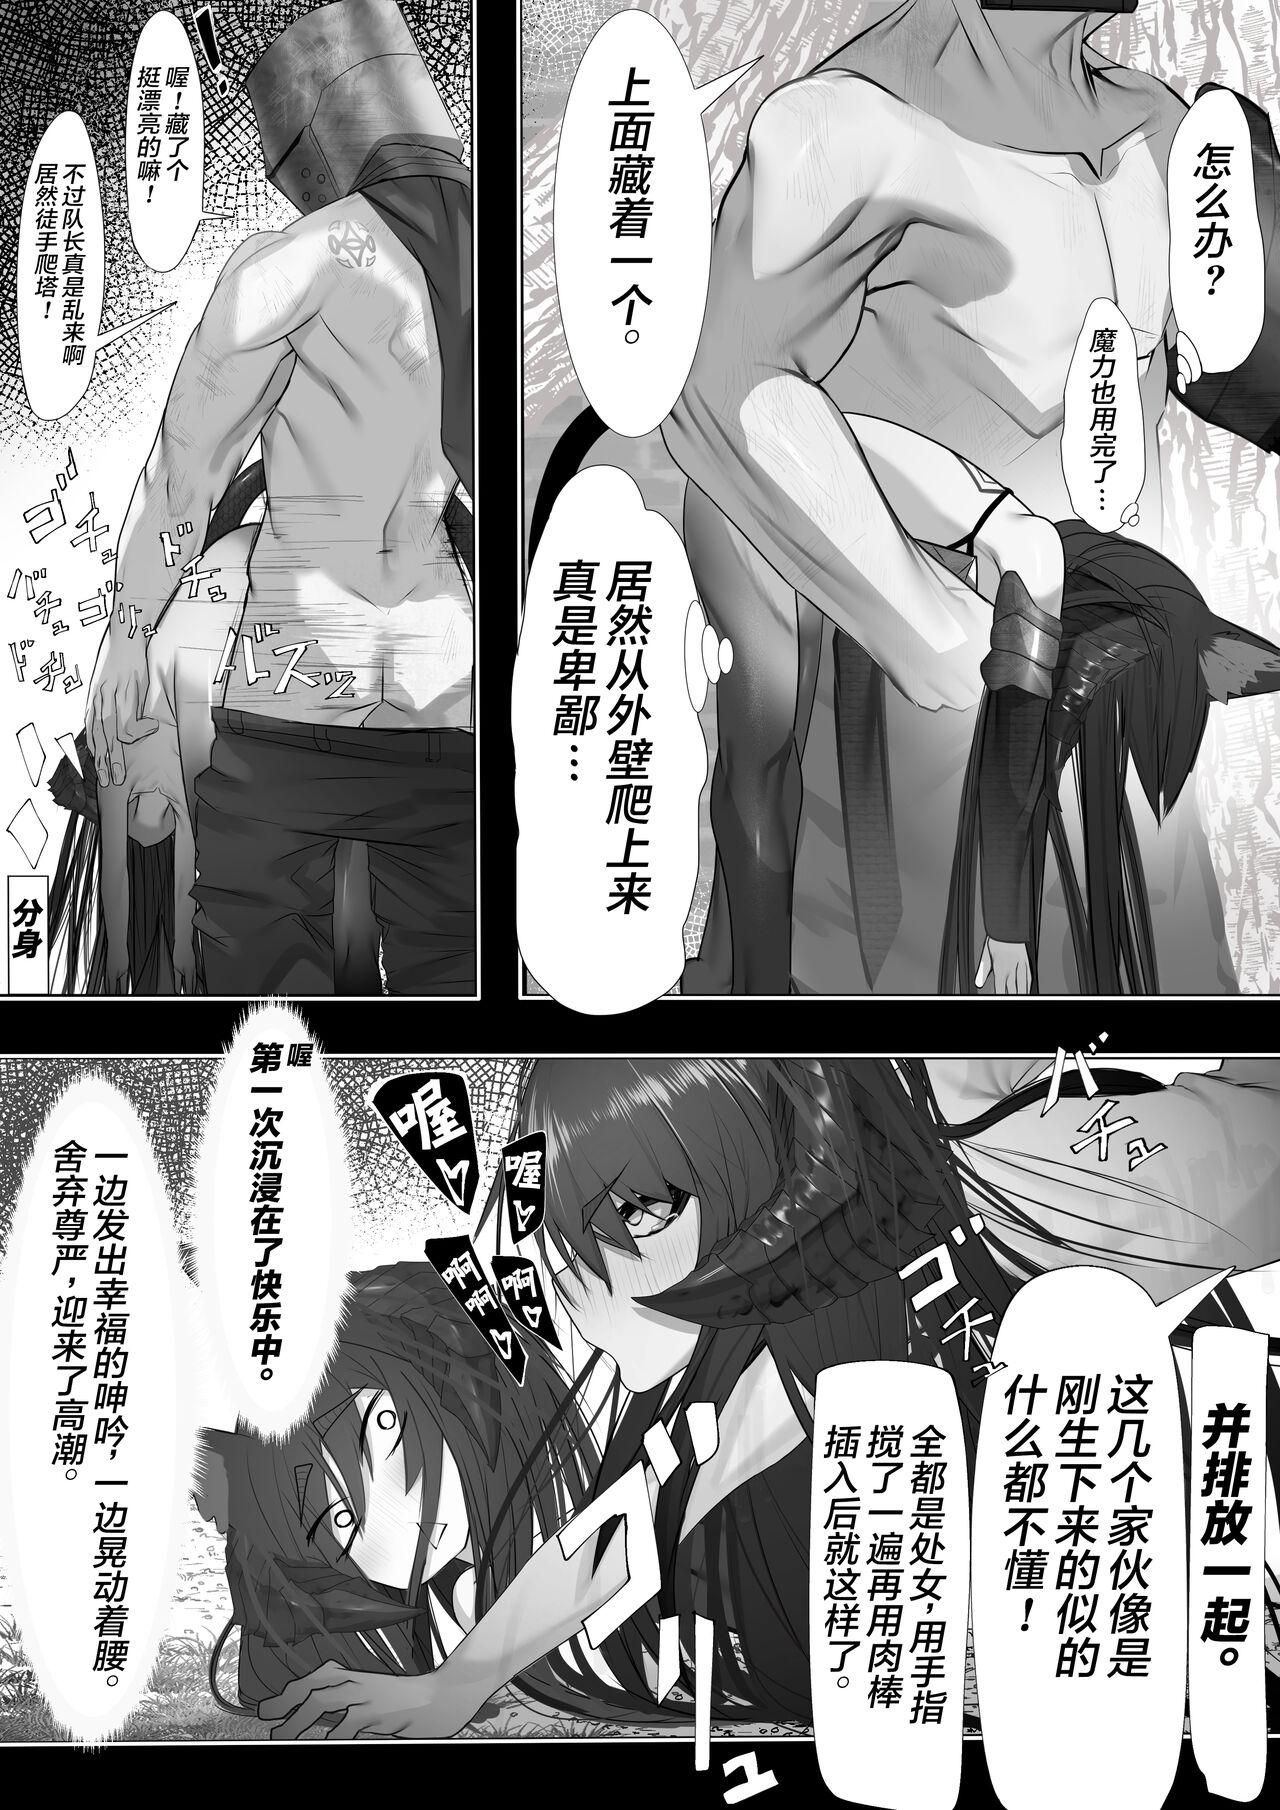 Ejaculation 上位魔族・・なんだが？ Amateurs Gone Wild - Page 10